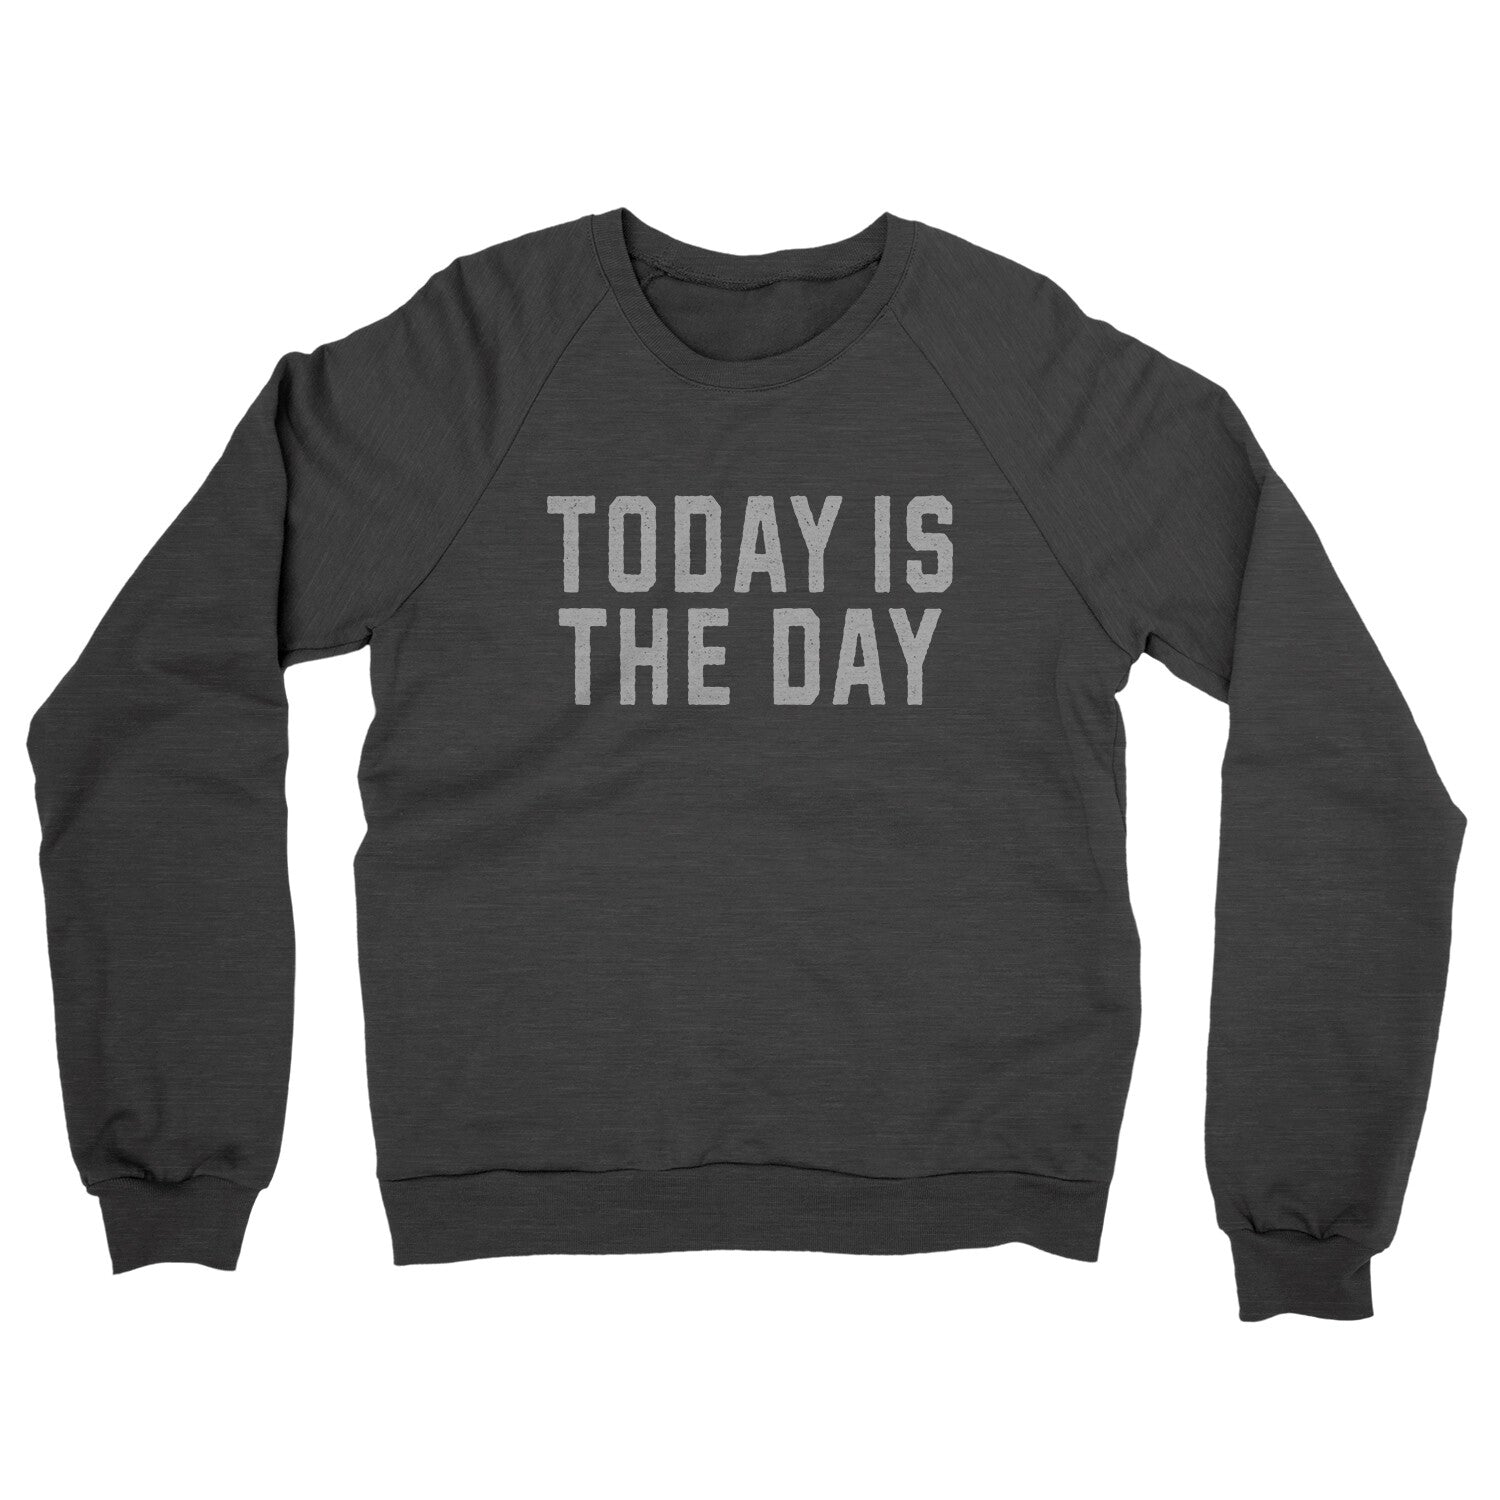 Today is the Day in Charcoal Heather Color